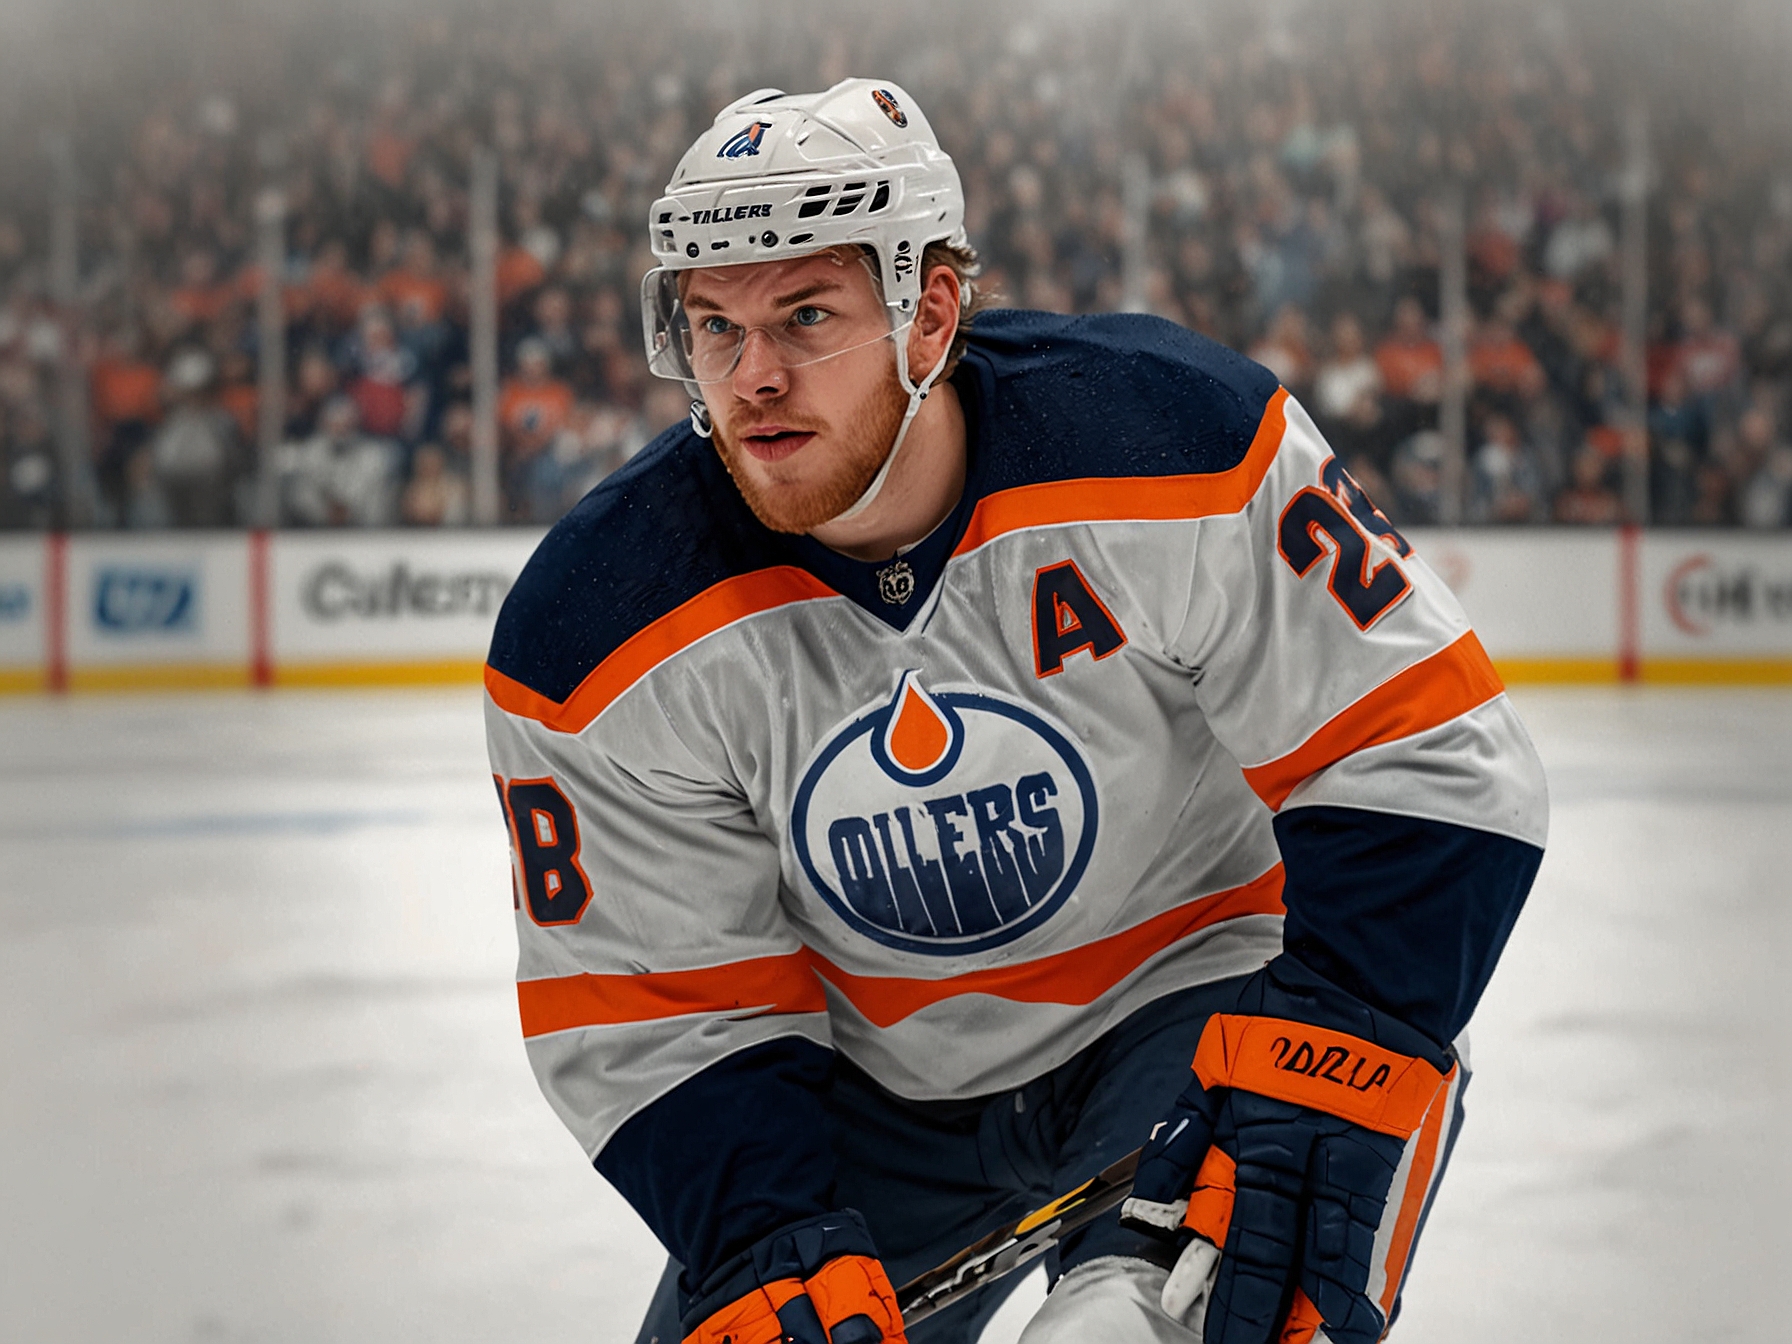 Connor McDavid in action during a high-stakes playoff game, showcasing his exceptional skill and leadership as he drives the Edmonton Oilers closer to a Stanley Cup Finals appearance.